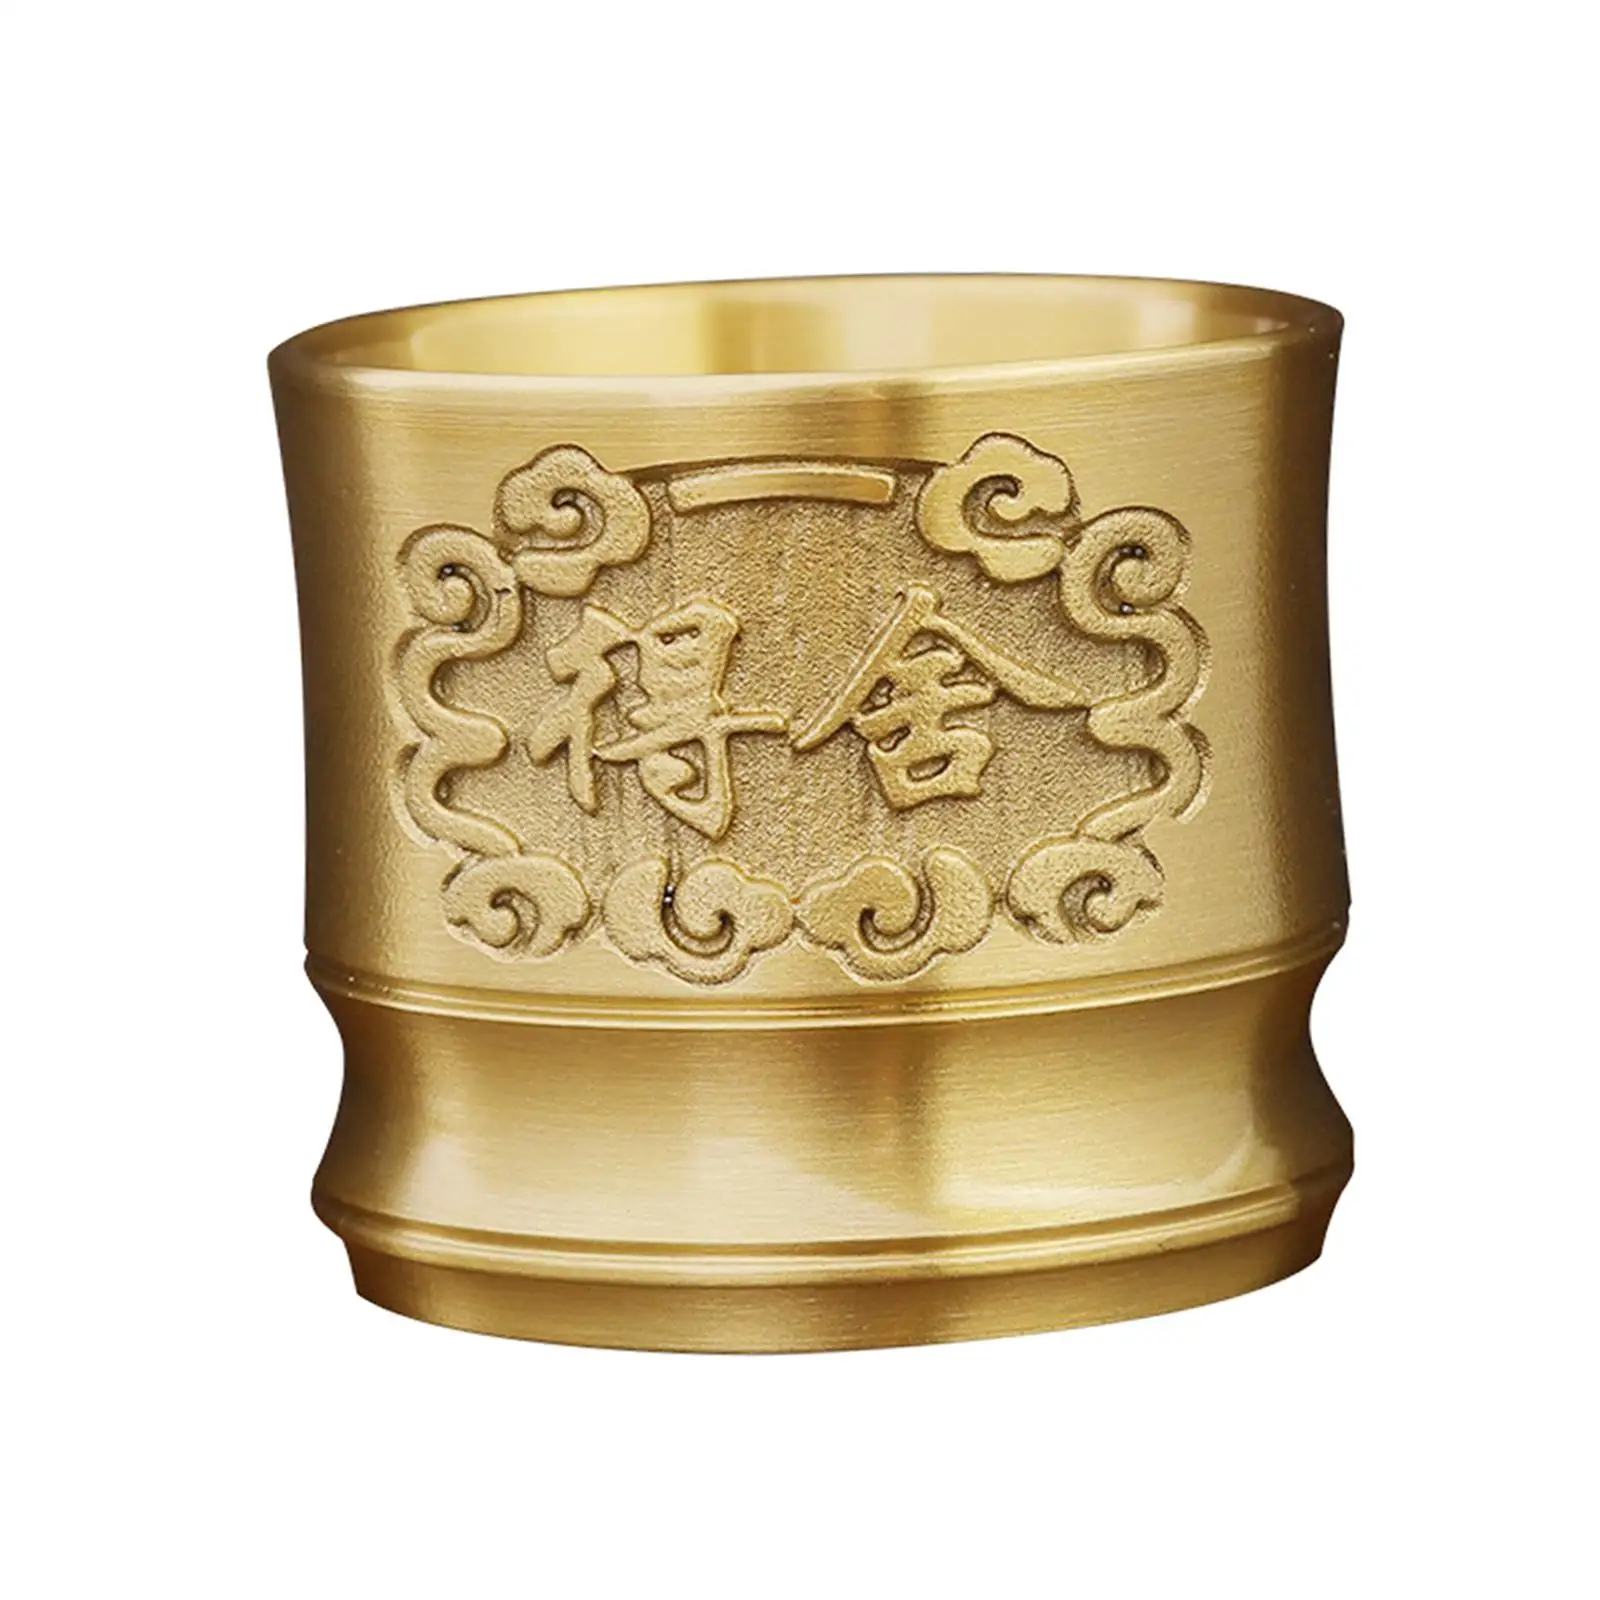 Chinese Style Brass Cup Collectibles Drinking Cup Teaware Engraved Personal Teacup for Desk Home Decor Housewarming Gift